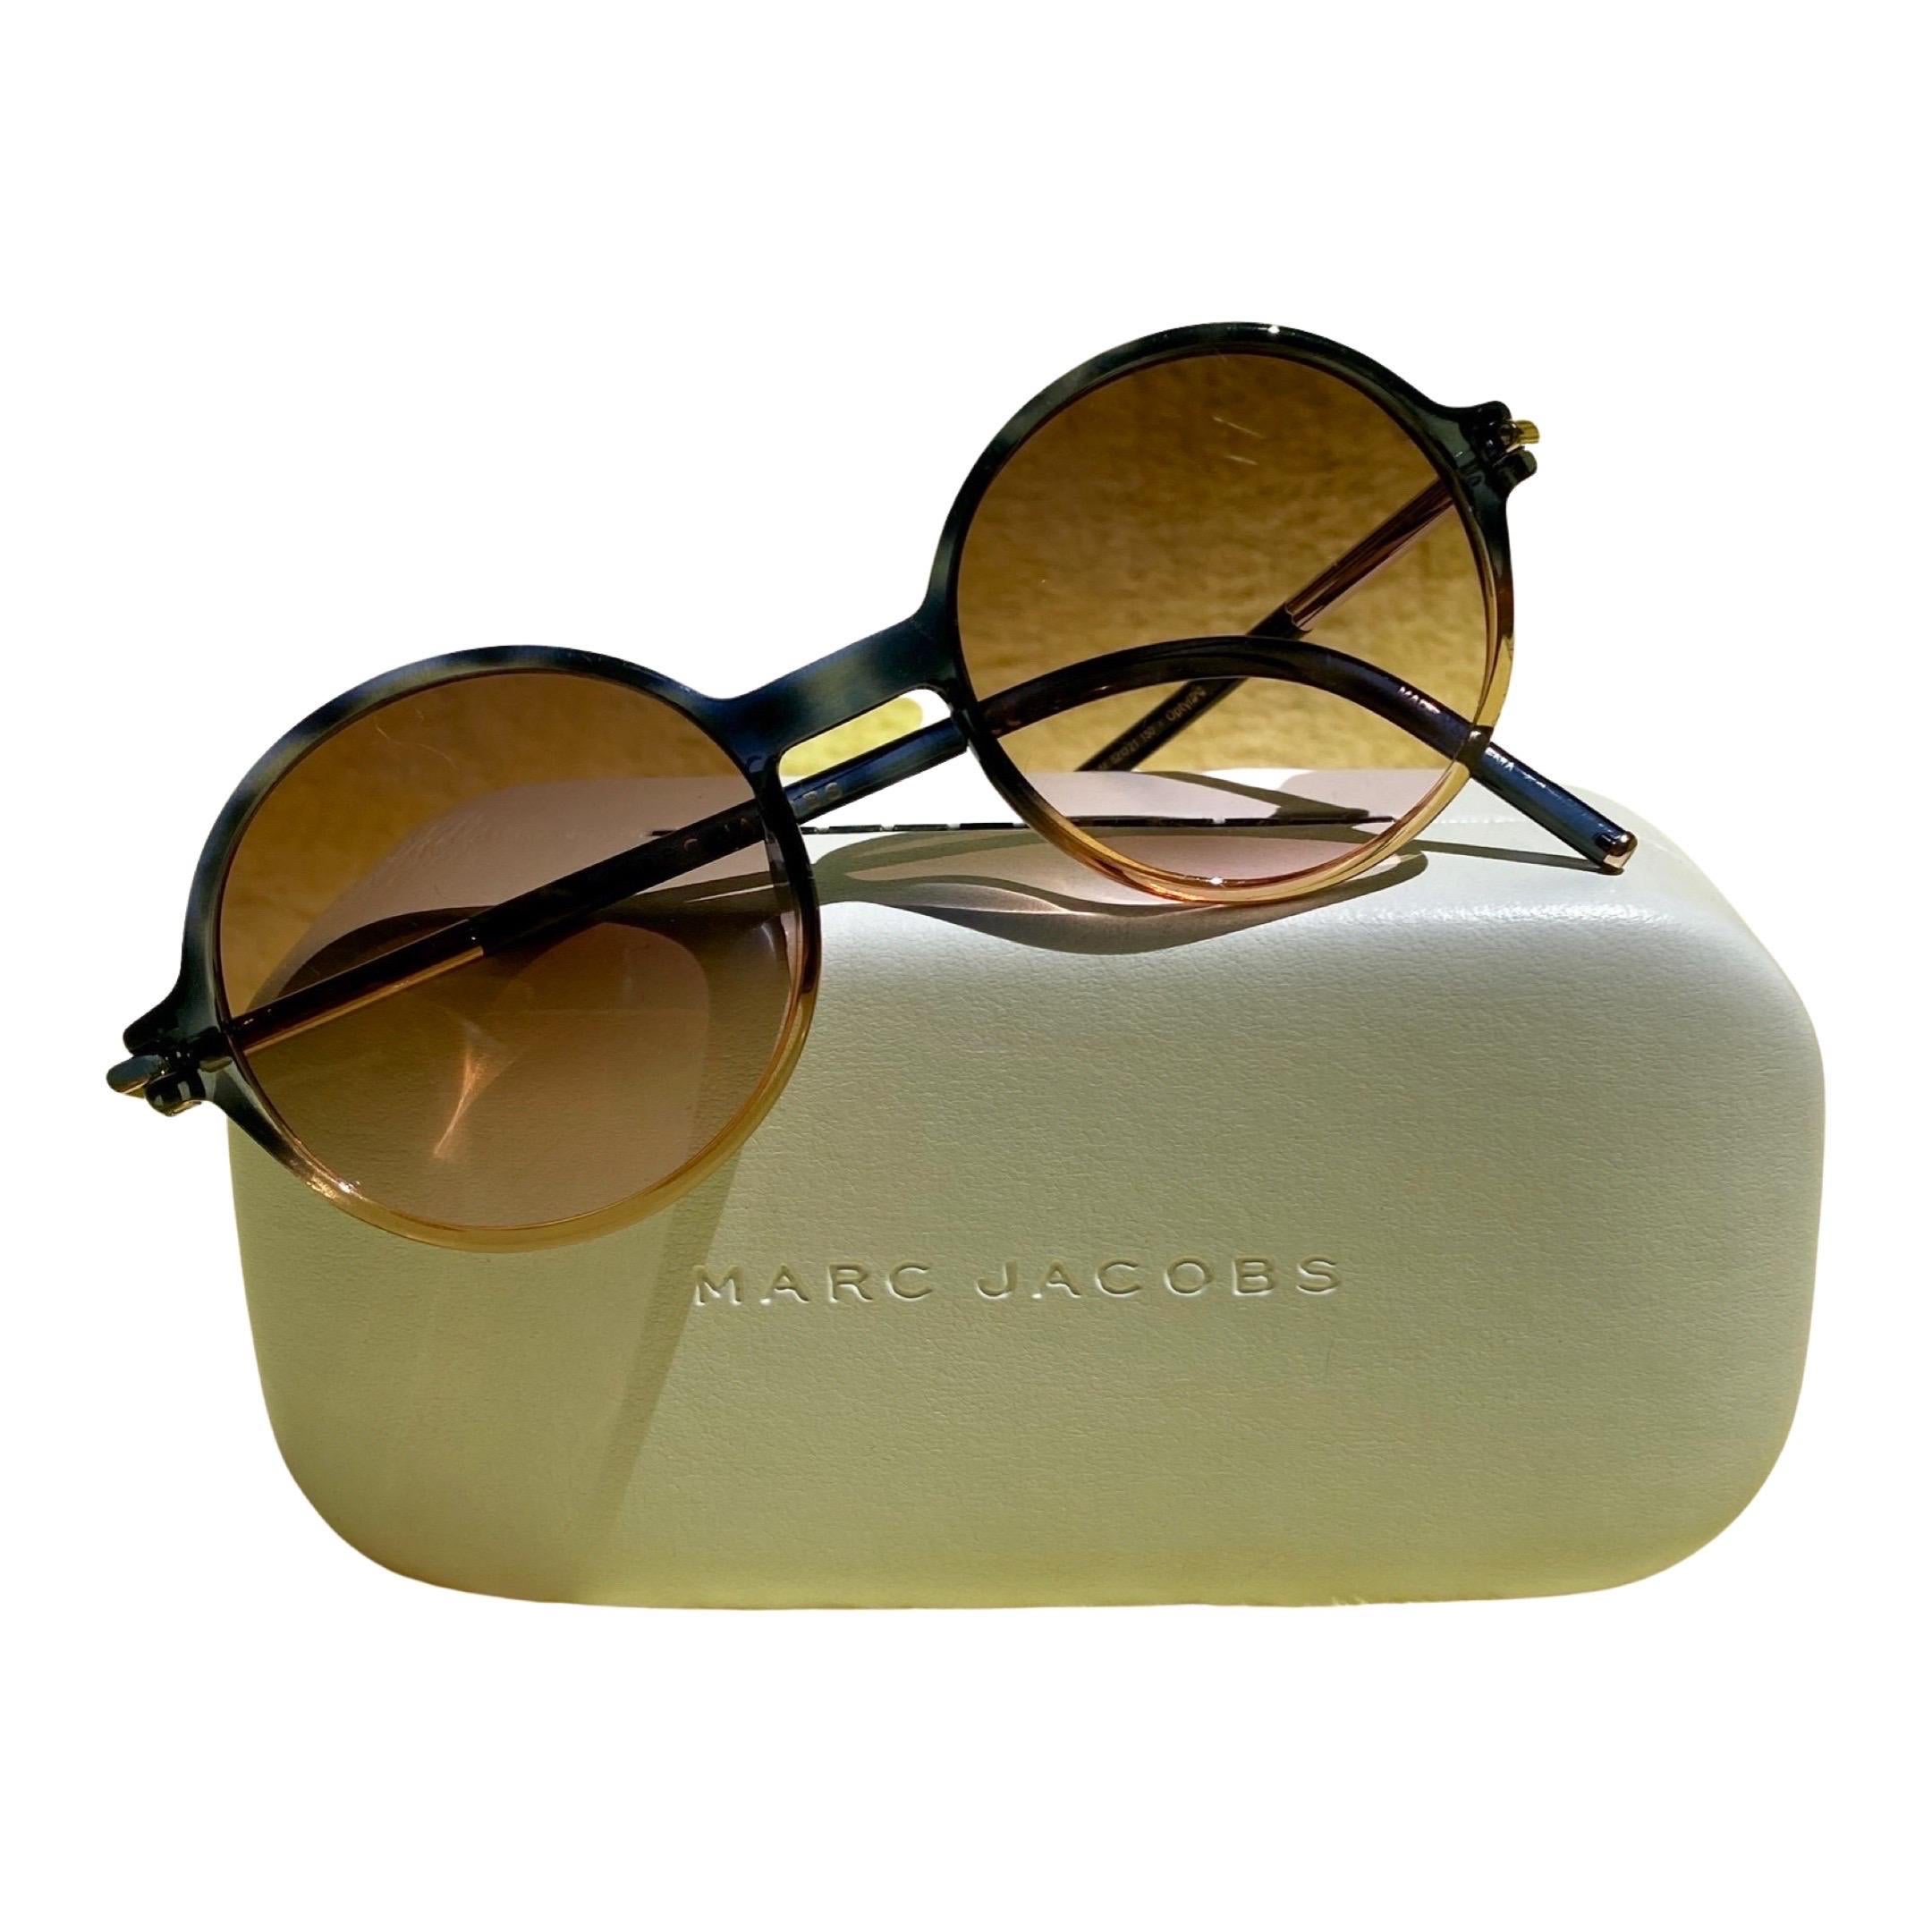 One of our fashionista clients in Palm Springs bought these sunglasses in five colors. This pair seems never to have been worn, but possibly worn once or twice according to the internet this was the most desirable color. Sold out very quickly. Style